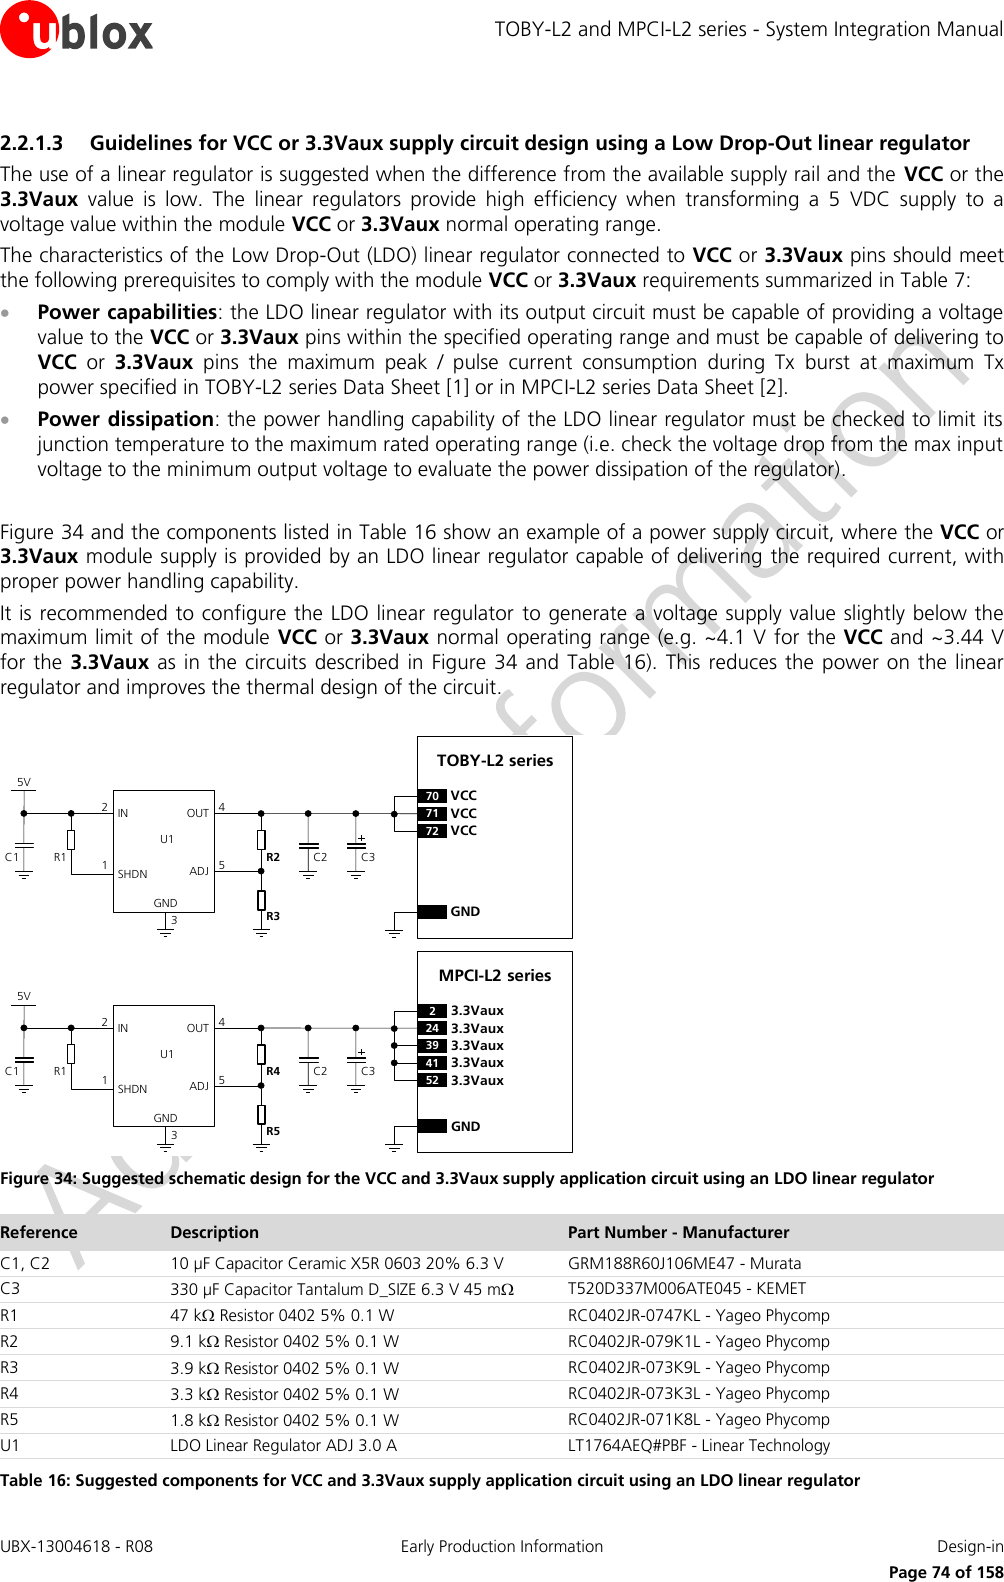 TOBY-L2 and MPCI-L2 series - System Integration Manual UBX-13004618 - R08  Early Production Information  Design-in     Page 74 of 158 2.2.1.3 Guidelines for VCC or 3.3Vaux supply circuit design using a Low Drop-Out linear regulator The use of a linear regulator is suggested when the difference from the available supply rail and the  VCC or the 3.3Vaux  value  is  low.  The  linear  regulators  provide  high  efficiency  when  transforming  a  5  VDC  supply  to  a voltage value within the module VCC or 3.3Vaux normal operating range. The characteristics of the Low Drop-Out (LDO) linear regulator connected to VCC or 3.3Vaux pins should meet the following prerequisites to comply with the module VCC or 3.3Vaux requirements summarized in Table 7:  Power capabilities: the LDO linear regulator with its output circuit must be capable of providing a voltage value to the VCC or 3.3Vaux pins within the specified operating range and must be capable of delivering to VCC  or  3.3Vaux  pins  the  maximum  peak  /  pulse  current  consumption  during  Tx  burst  at  maximum  Tx power specified in TOBY-L2 series Data Sheet [1] or in MPCI-L2 series Data Sheet [2].  Power dissipation: the power handling capability of the LDO linear regulator must be checked to limit its junction temperature to the maximum rated operating range (i.e. check the voltage drop from the max input voltage to the minimum output voltage to evaluate the power dissipation of the regulator).  Figure 34 and the components listed in Table 16 show an example of a power supply circuit, where the VCC or 3.3Vaux module supply is provided by an LDO linear regulator capable of delivering the required current, with proper power handling capability. It is recommended to configure the LDO linear regulator  to generate a voltage supply value slightly below the maximum limit of the module VCC or 3.3Vaux normal operating range (e.g. ~4.1 V for the VCC and ~3.44 V for the 3.3Vaux  as  in the circuits described  in  Figure 34 and  Table  16). This reduces  the  power on the  linear regulator and improves the thermal design of the circuit.  5VC1 R1IN OUTADJGND12453C2R2R3U1SHDNTOBY-L2 series71 VCC72 VCC70 VCCGNDC35VC1 R1IN OUTADJGND12453C2R4R5U1SHDNMPCI-L2 seriesGNDC324 3.3Vaux39 3.3Vaux23.3Vaux41 3.3Vaux52 3.3Vaux Figure 34: Suggested schematic design for the VCC and 3.3Vaux supply application circuit using an LDO linear regulator Reference Description Part Number - Manufacturer C1, C2 10 µF Capacitor Ceramic X5R 0603 20% 6.3 V GRM188R60J106ME47 - Murata C3 330 µF Capacitor Tantalum D_SIZE 6.3 V 45 m T520D337M006ATE045 - KEMET R1 47 k Resistor 0402 5% 0.1 W RC0402JR-0747KL - Yageo Phycomp R2 9.1 k Resistor 0402 5% 0.1 W RC0402JR-079K1L - Yageo Phycomp R3 3.9 k Resistor 0402 5% 0.1 W RC0402JR-073K9L - Yageo Phycomp R4 3.3 k Resistor 0402 5% 0.1 W RC0402JR-073K3L - Yageo Phycomp R5 1.8 k Resistor 0402 5% 0.1 W RC0402JR-071K8L - Yageo Phycomp U1 LDO Linear Regulator ADJ 3.0 A LT1764AEQ#PBF - Linear Technology Table 16: Suggested components for VCC and 3.3Vaux supply application circuit using an LDO linear regulator 